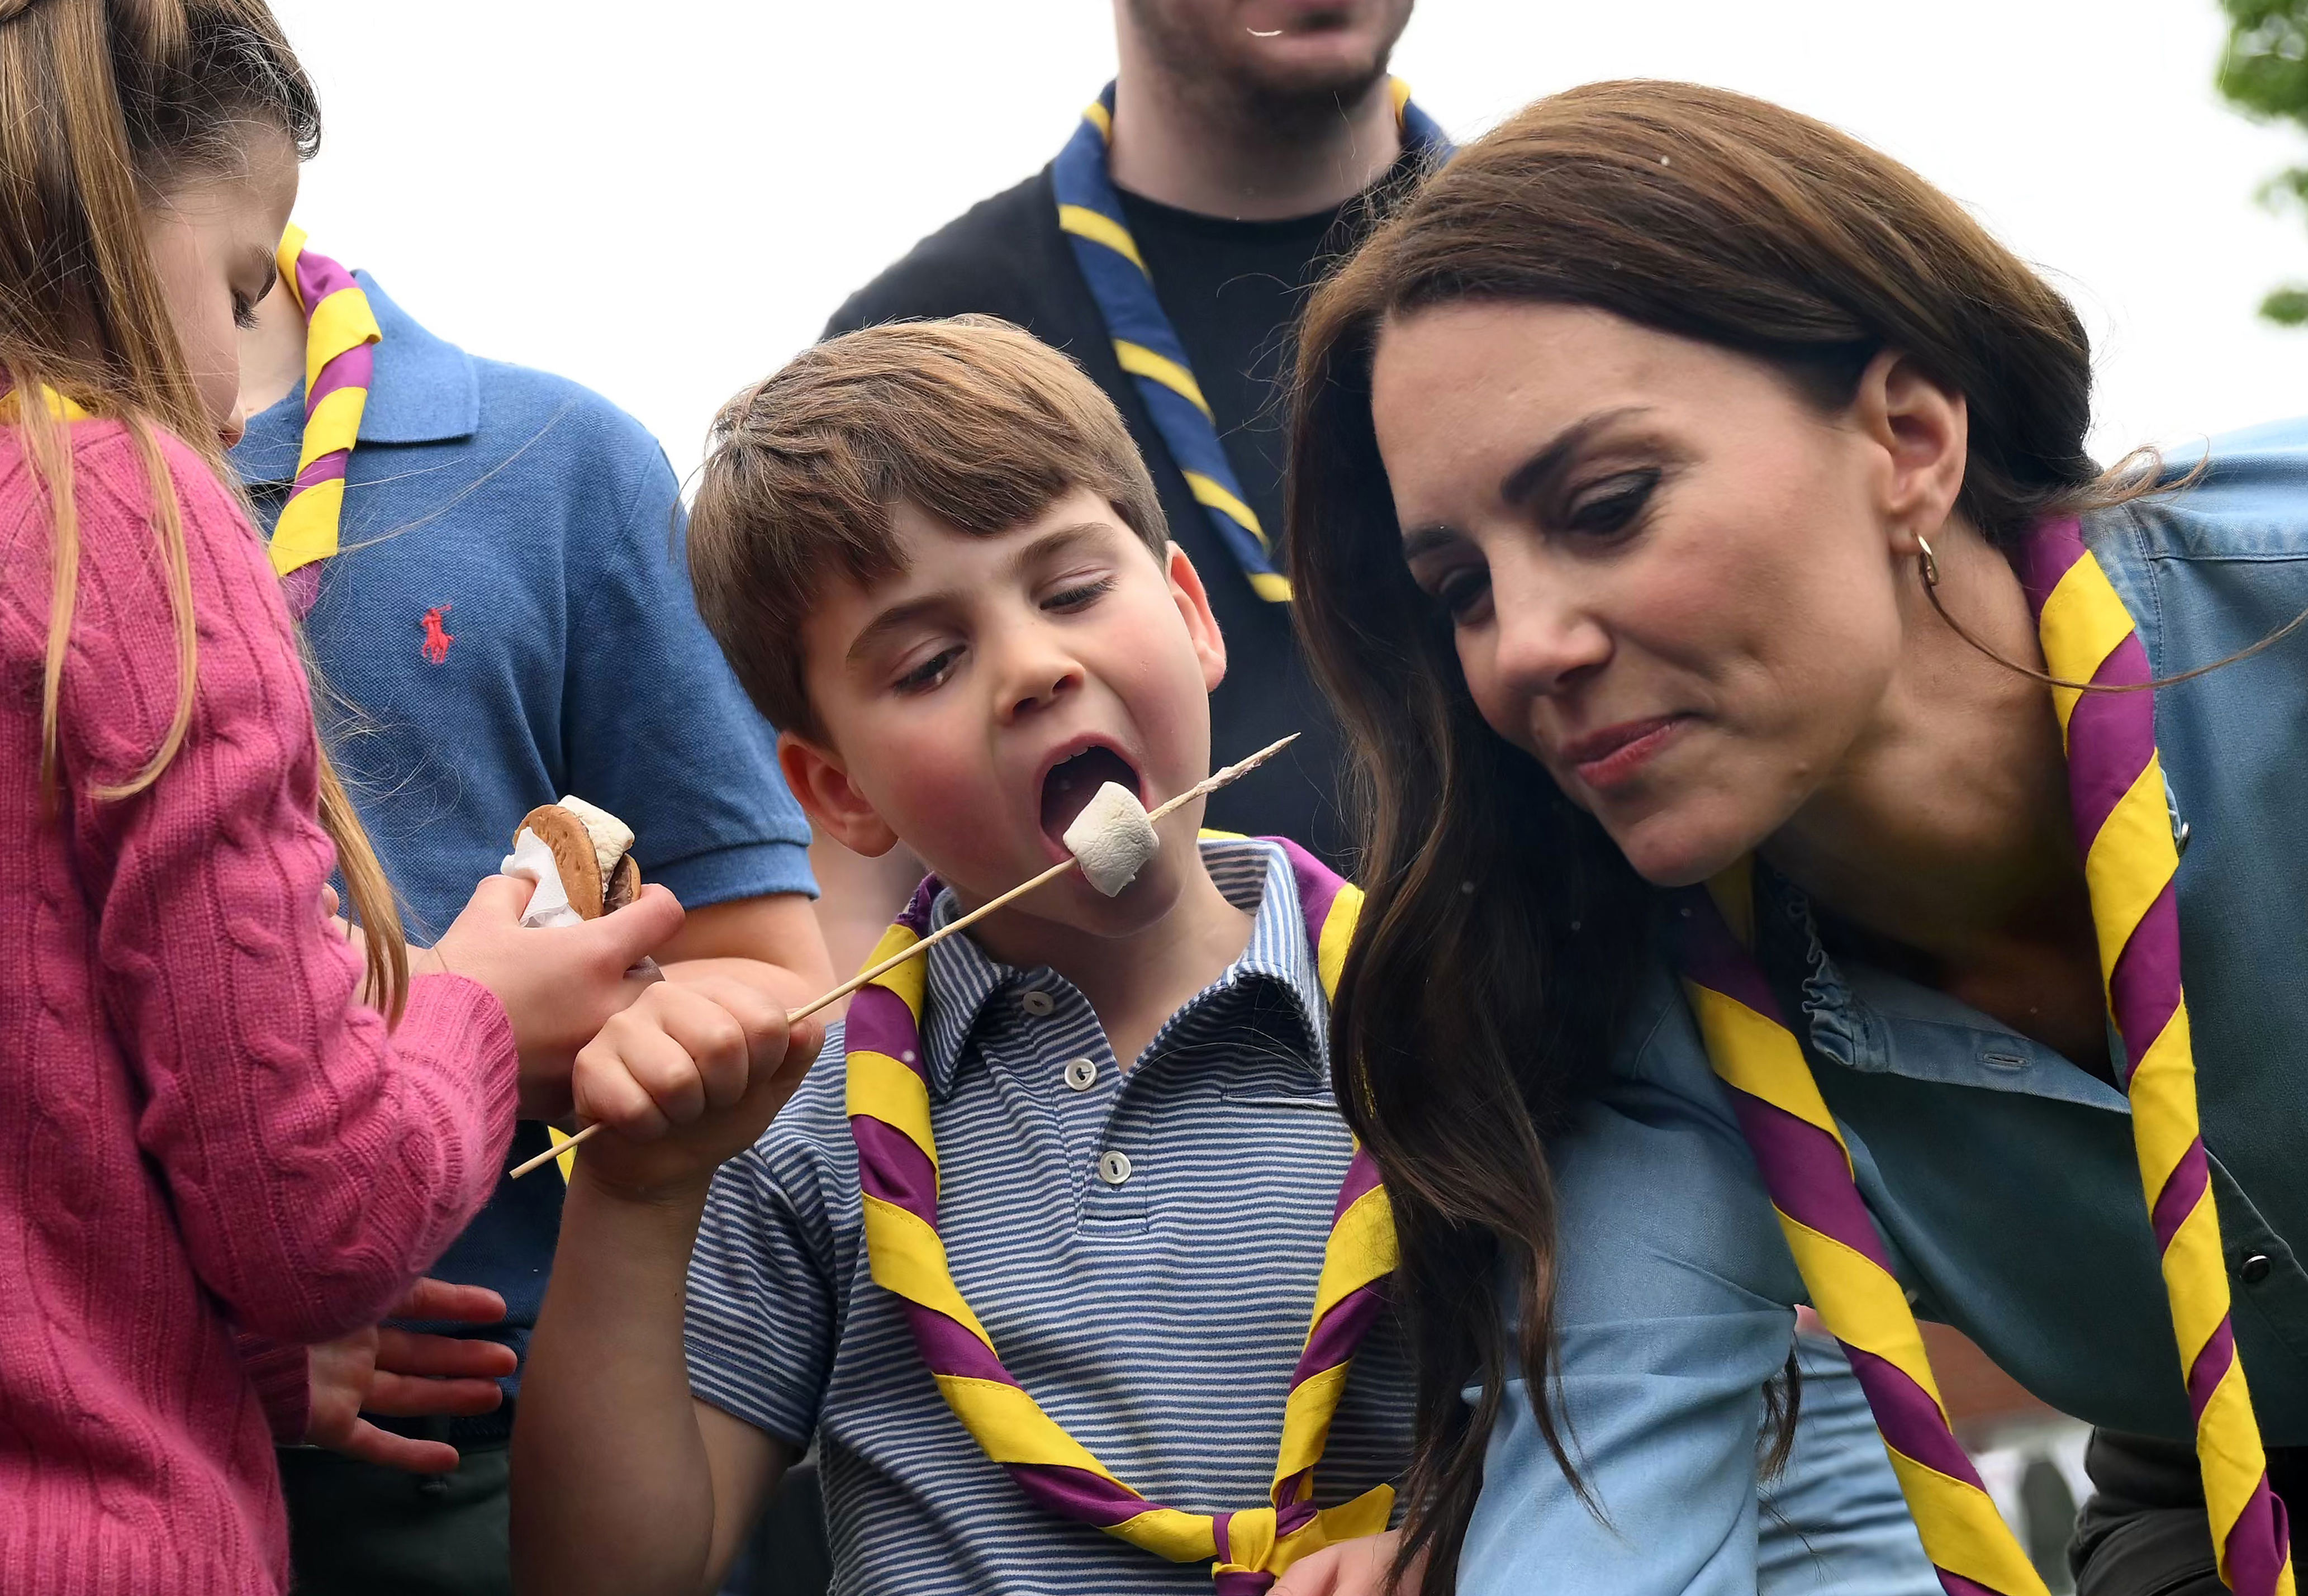 <p>Prince Louis enjoyed a toasted marshmallow while taking part in the Big Help Out volunteering drive -- the final event of grandfather King Charles III's <a href="https://www.wonderwall.com/celebrity/the-coronation-of-king-charles-iii-and-queen-camilla-the-best-pictures-of-all-the-royals-at-this-historic-event-735015.gallery">coronation</a> festivities -- during a visit to the 3rd Upton Scouts Hut in Slough, England, on May 8, 2023. The Prince and Princess of Wales and their children helped to renovate and improve the building during their visit.</p>